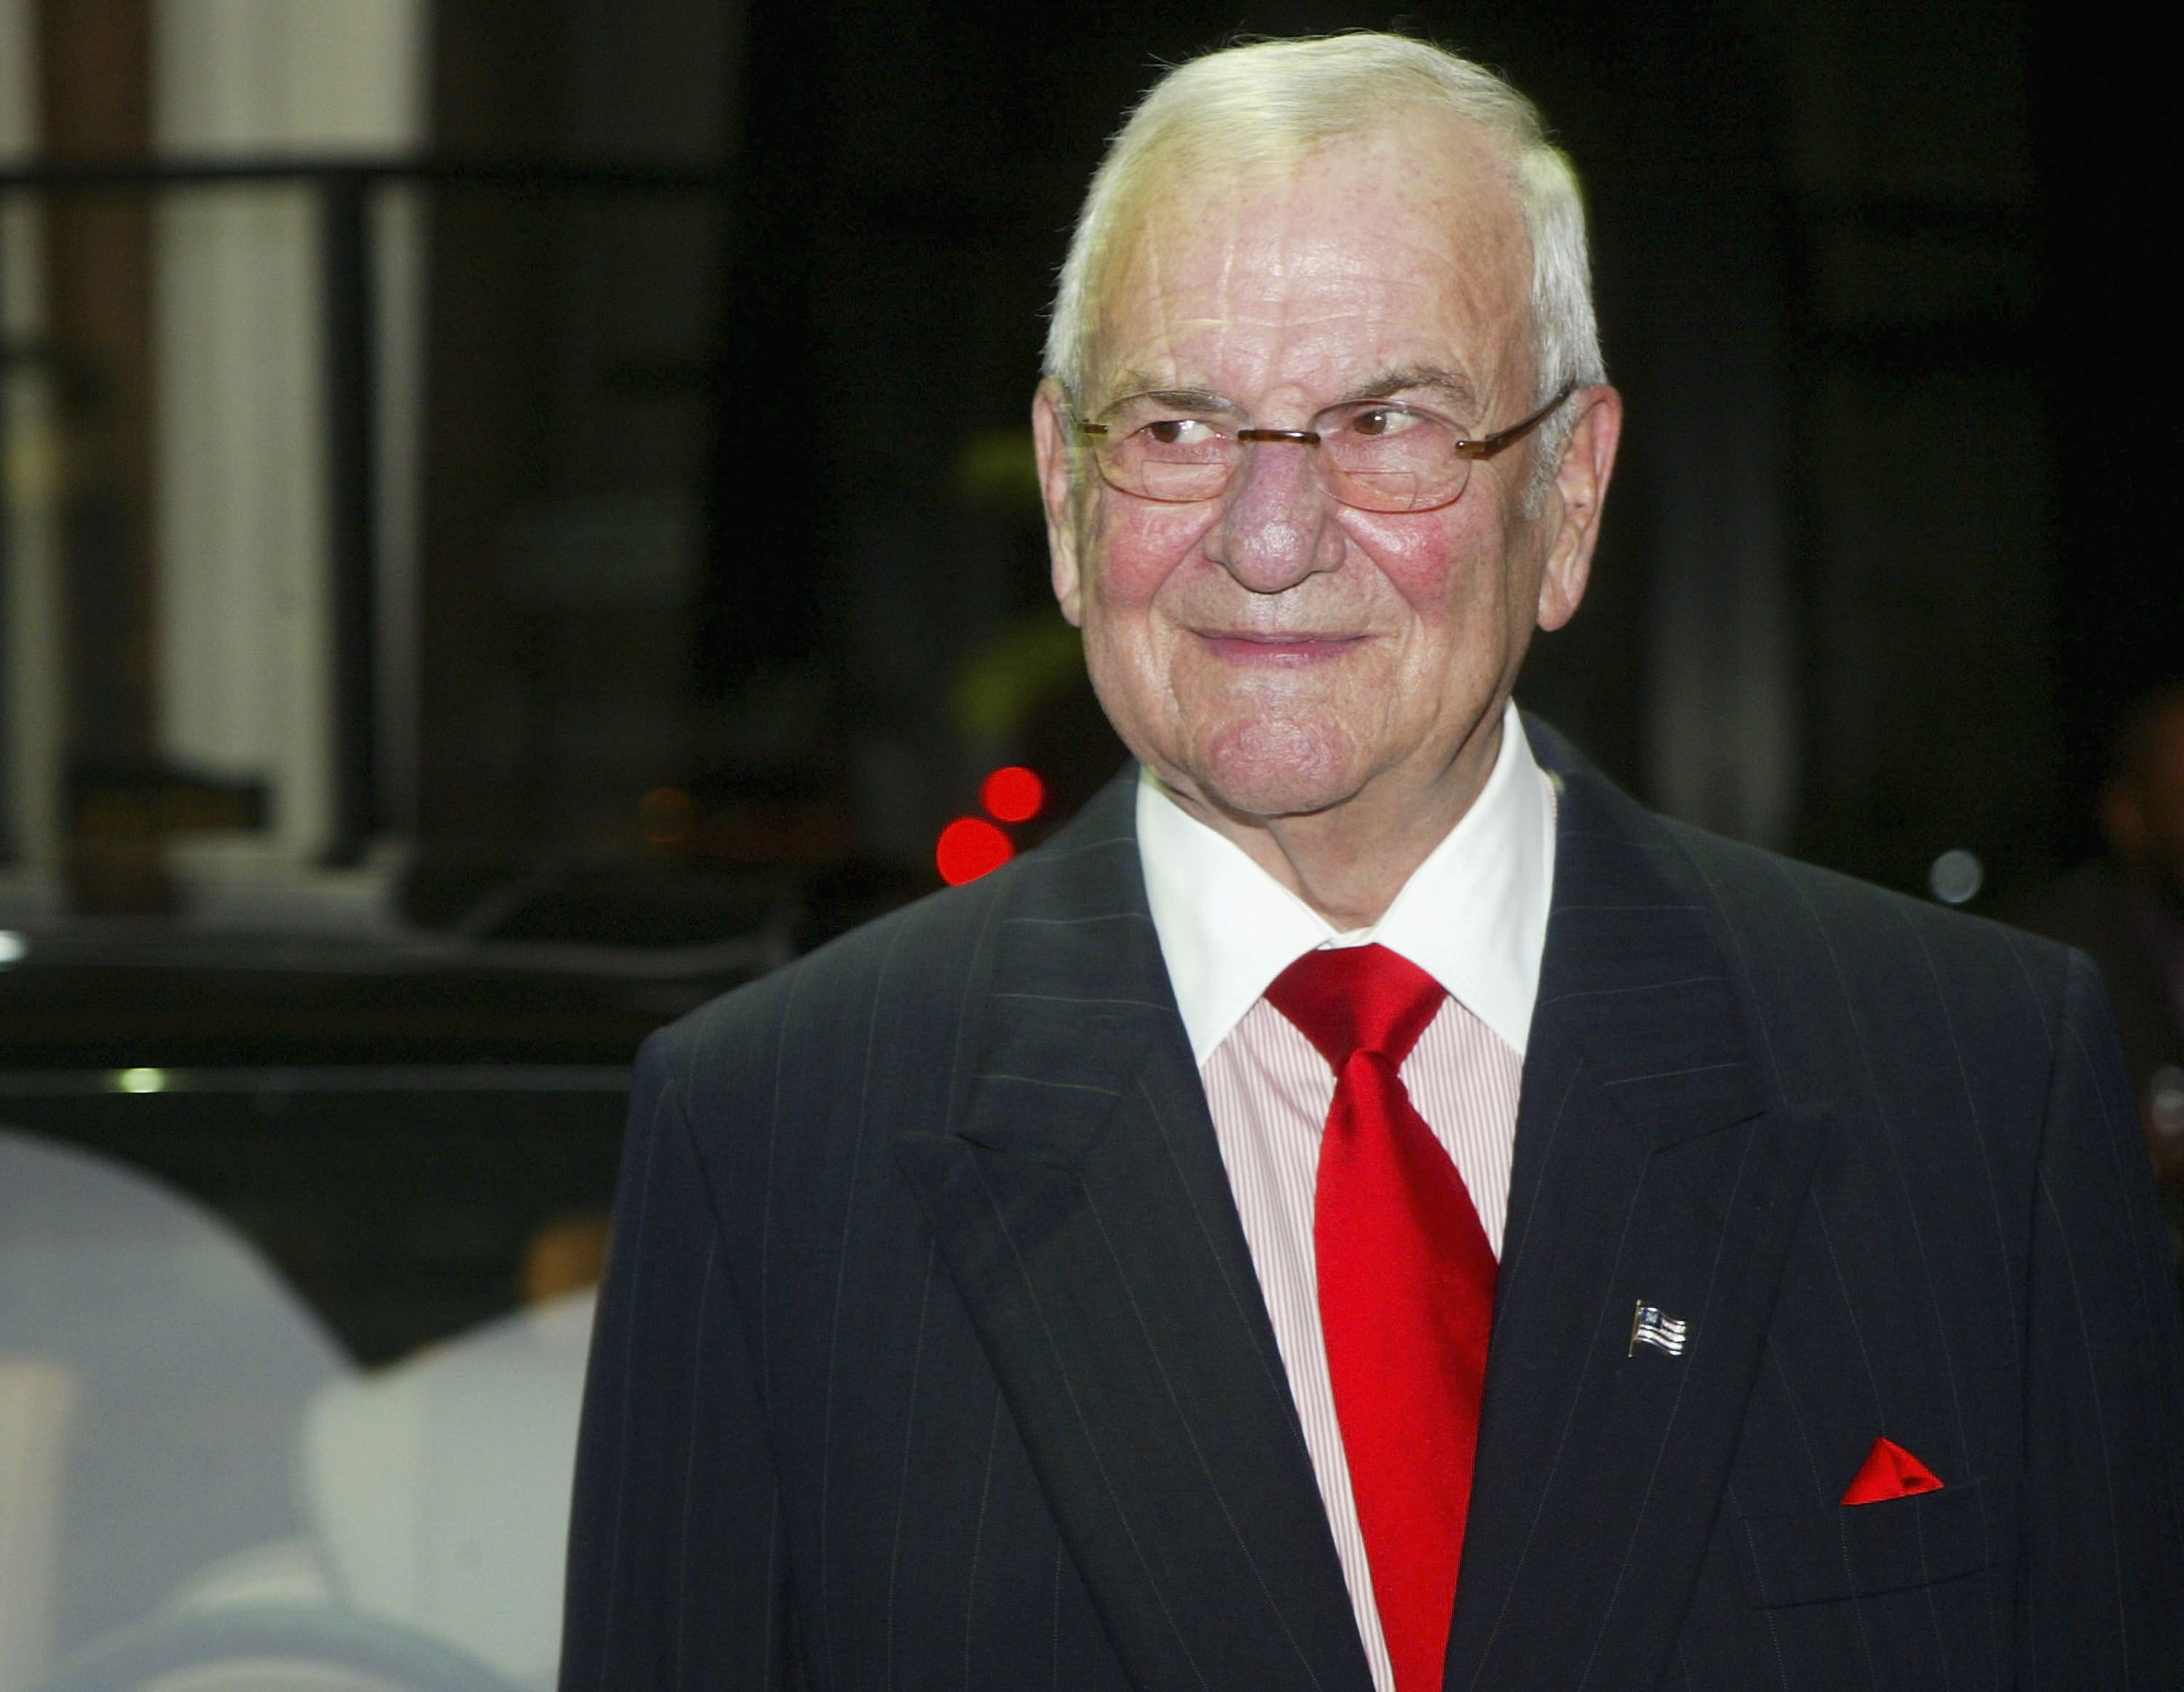 Lee Iacocca, auto industry icon, dead at 94